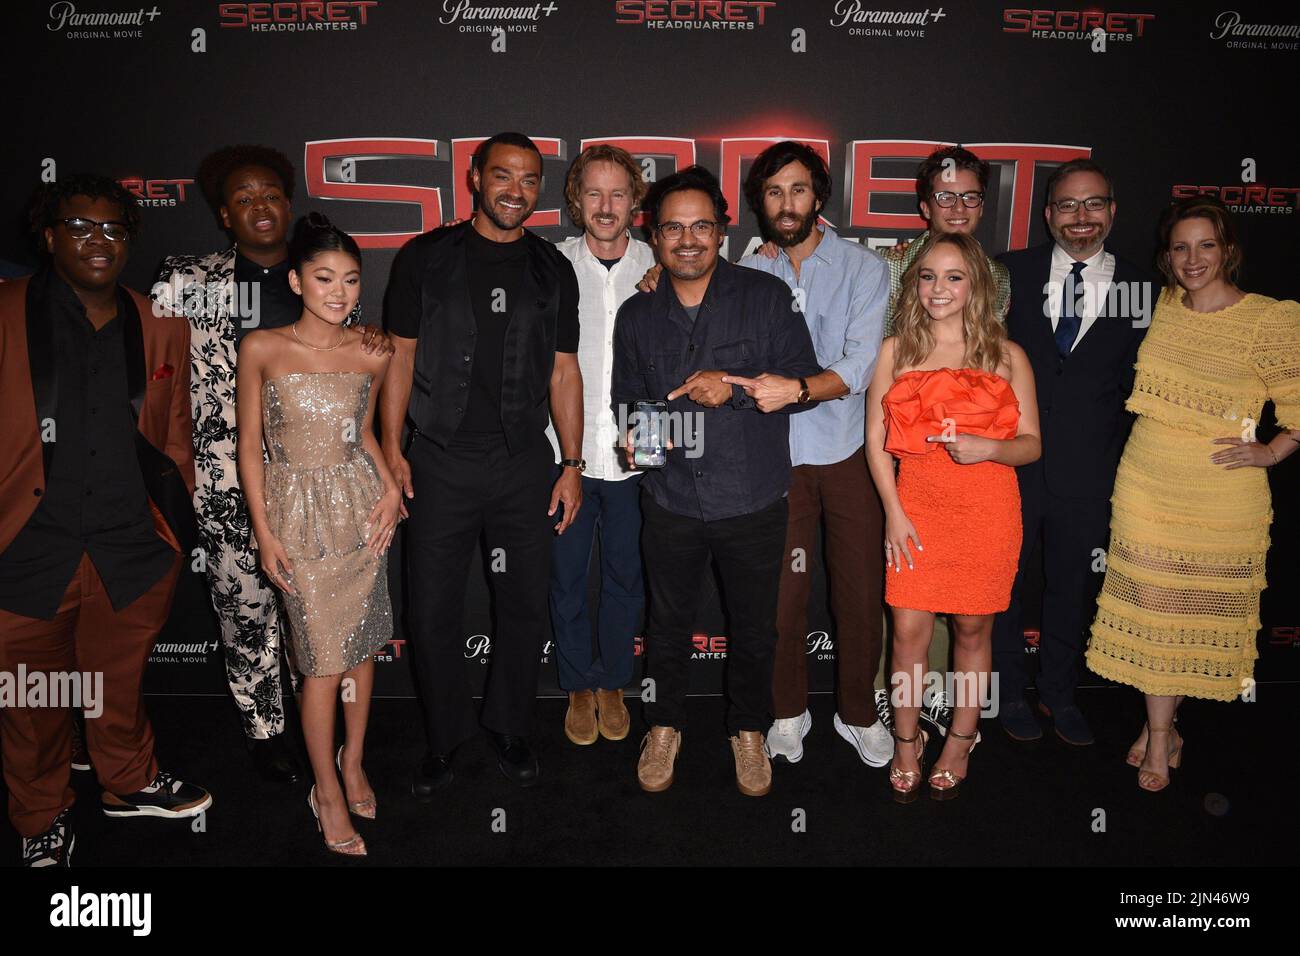 New York, NY, USA. 8th Aug, 2022. Kezii Curtis, Keith L. Williams, Momona Tamada, Jesse Williams, Owen Wilson, Michael Pena, Ariel Schulman, Henry Joost, Jessie Mueller, Abby James Witherspoon at arrivals for SECRET HEADQUARTERS Premiere, Signature Theatre Company, New York, NY August 8, 2022. Credit: Kristin Callahan/Everett Collection/Alamy Live News Stock Photo